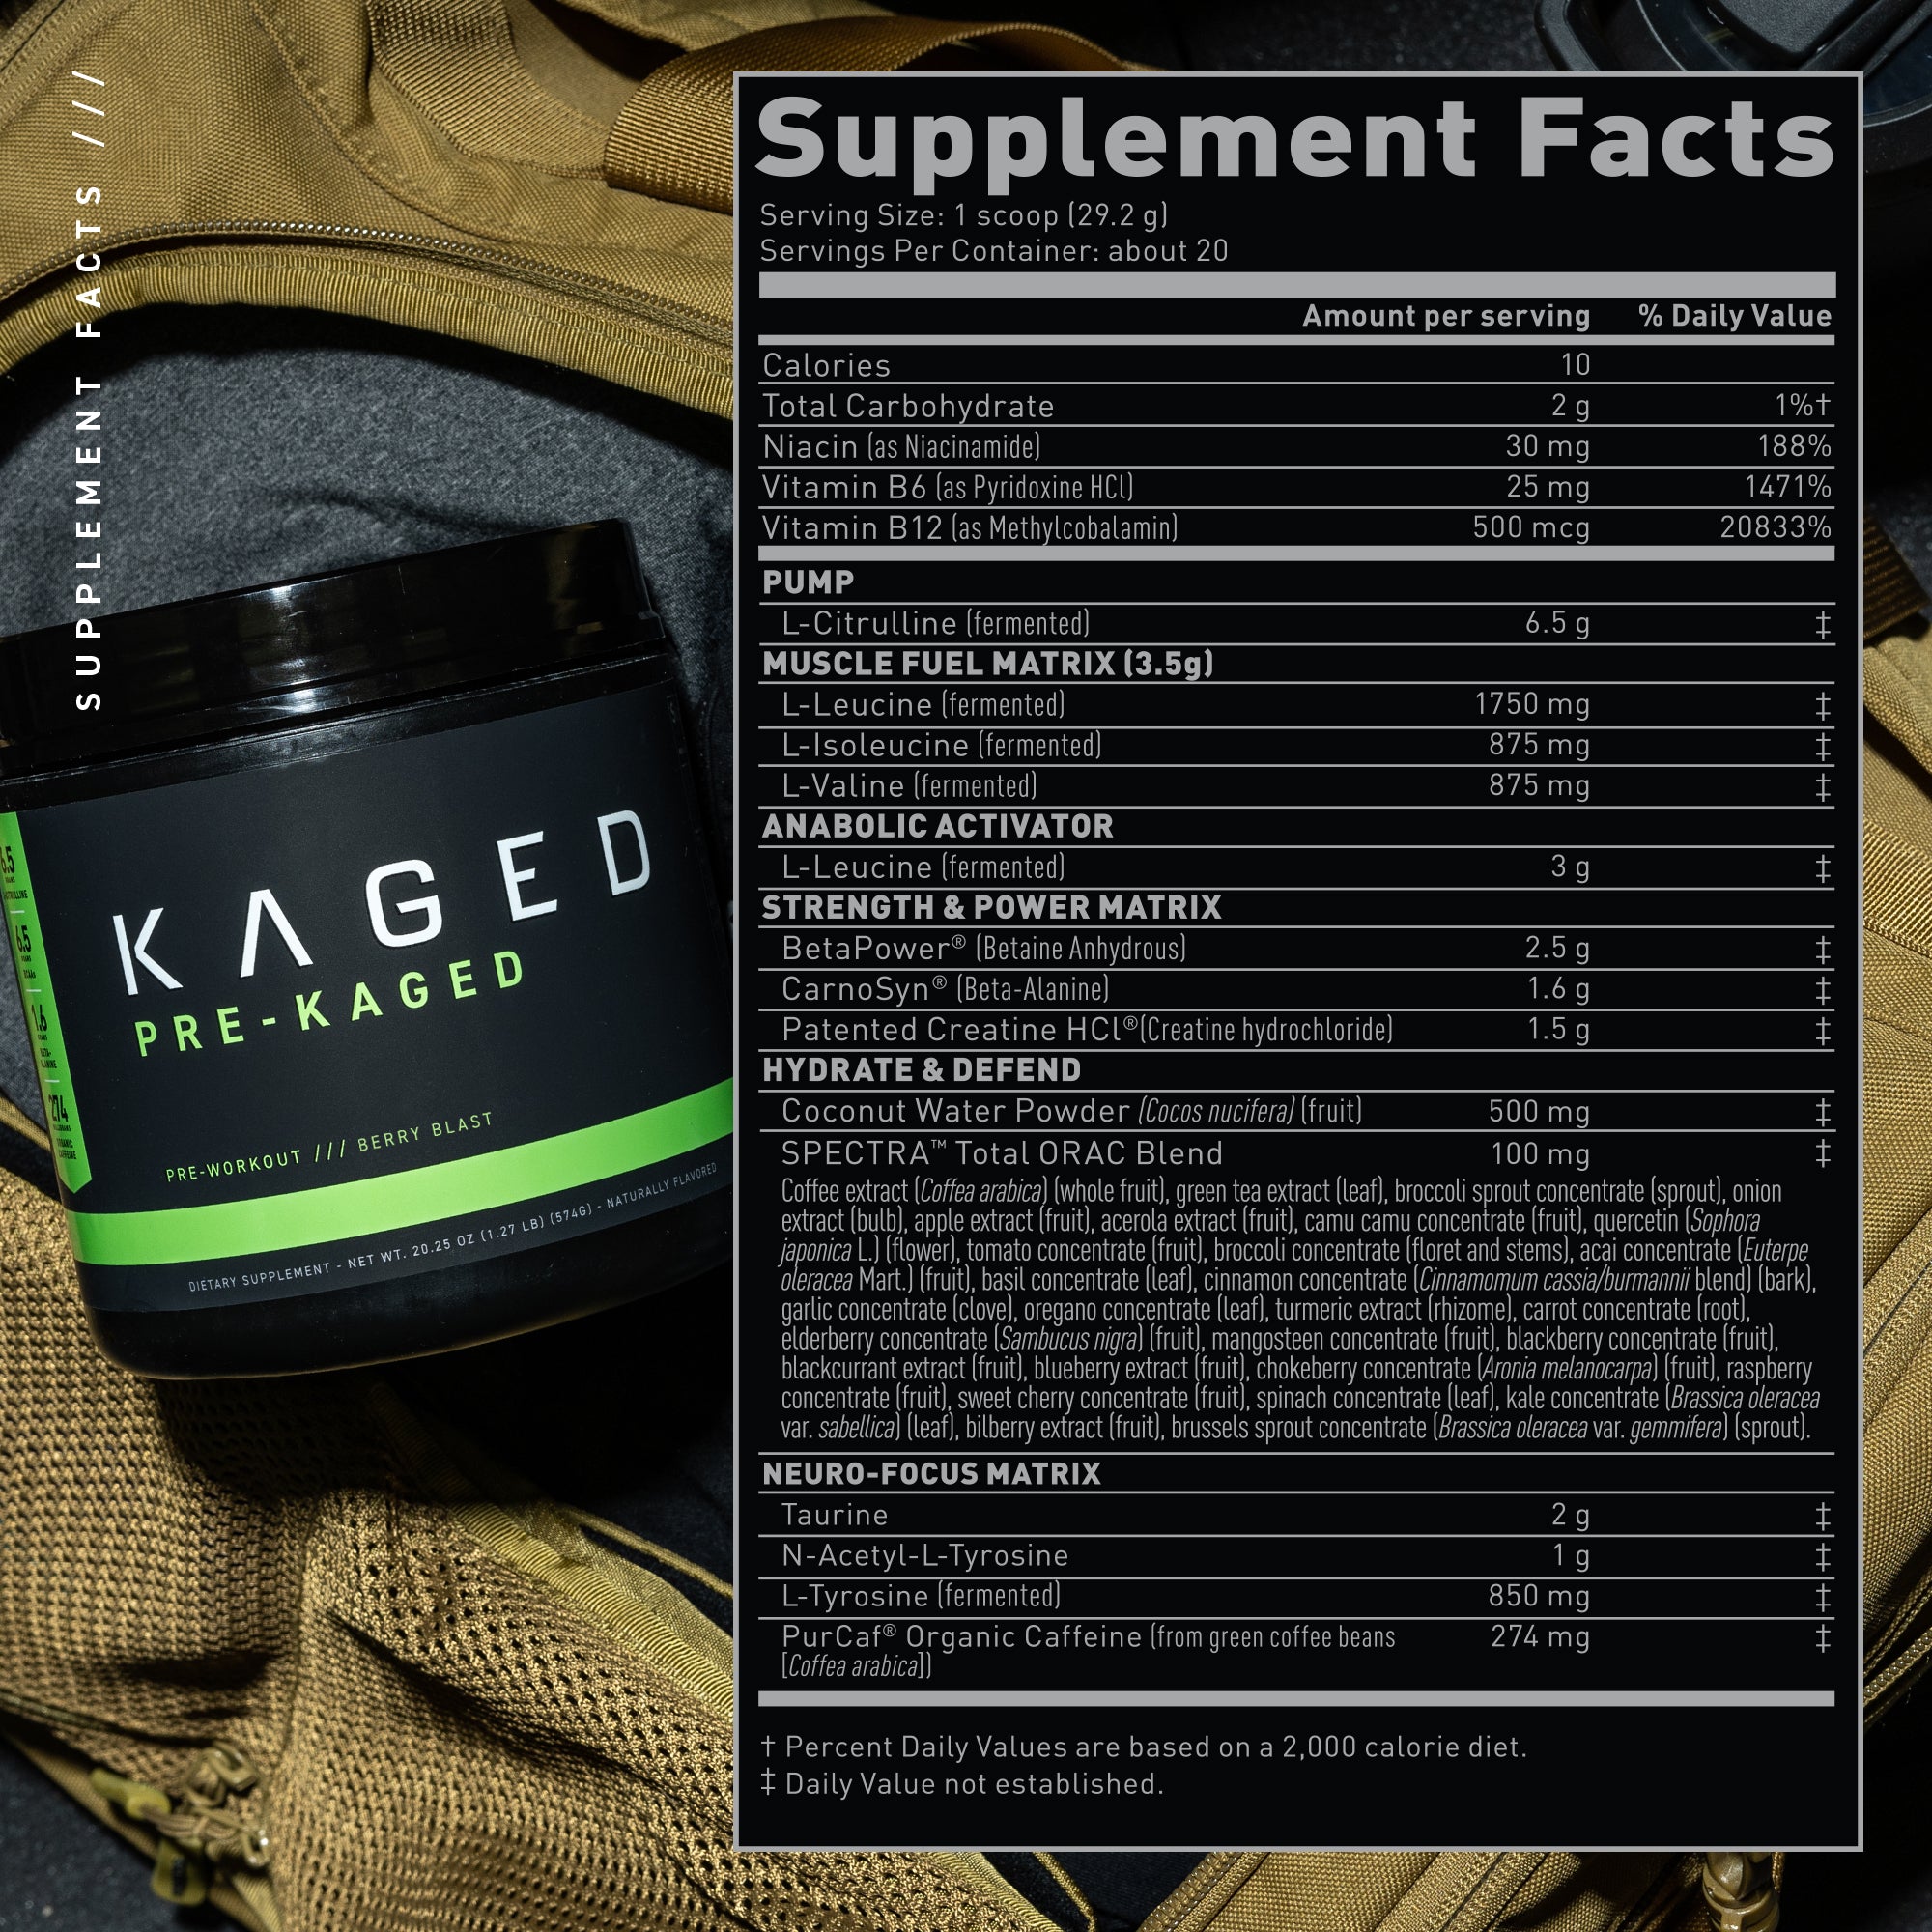 Pre-Kaged Supplement Facts